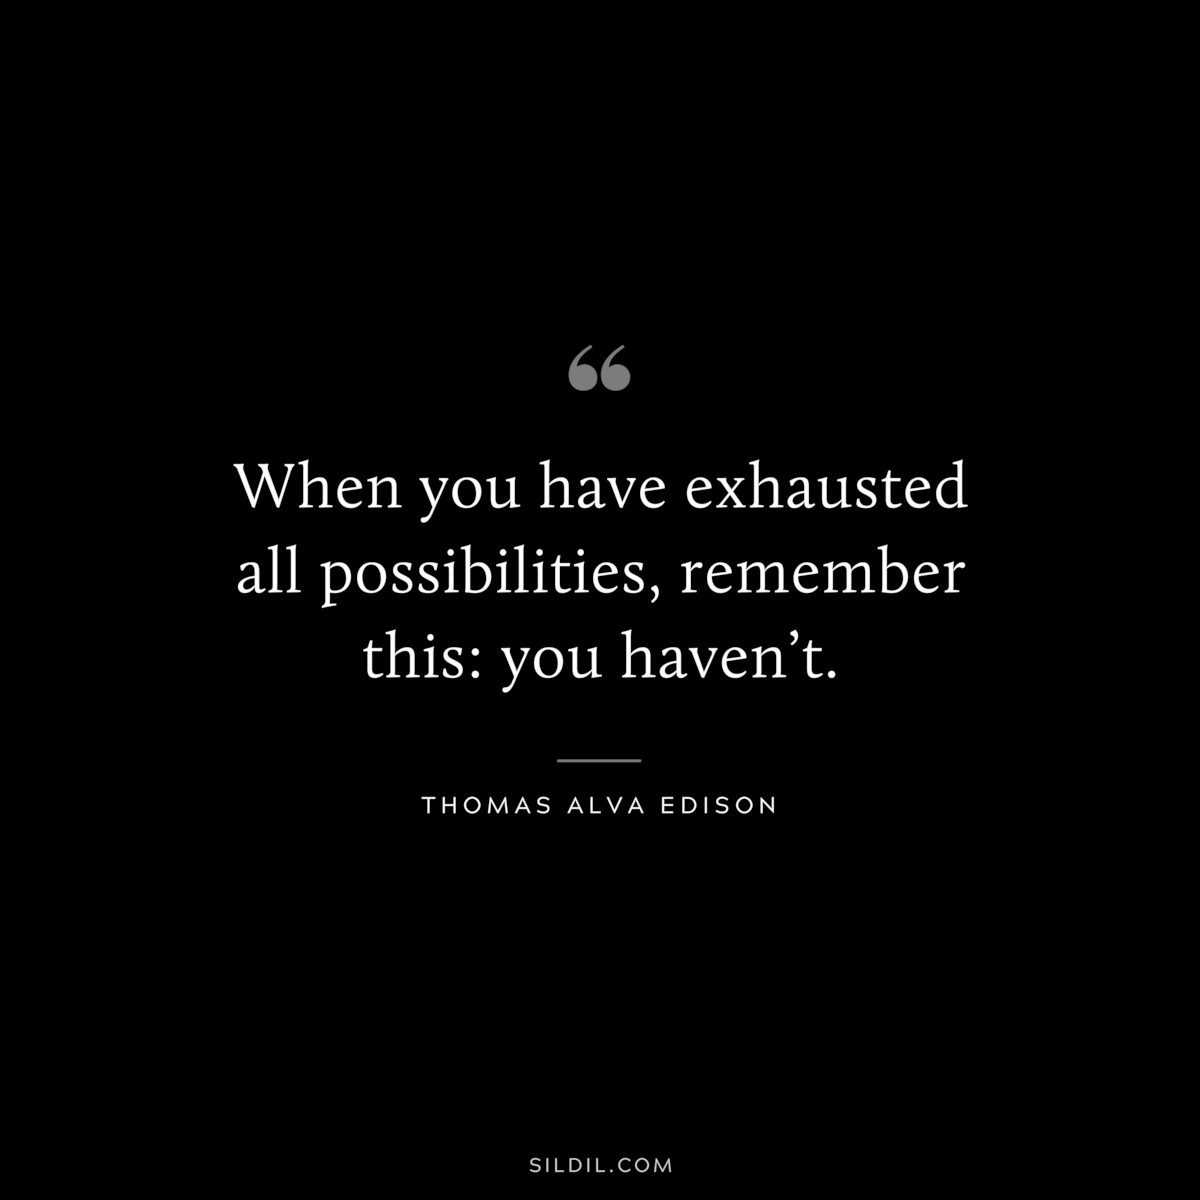 When you have exhausted all possibilities, remember this: you haven’t. ― Thomas Alva Edison